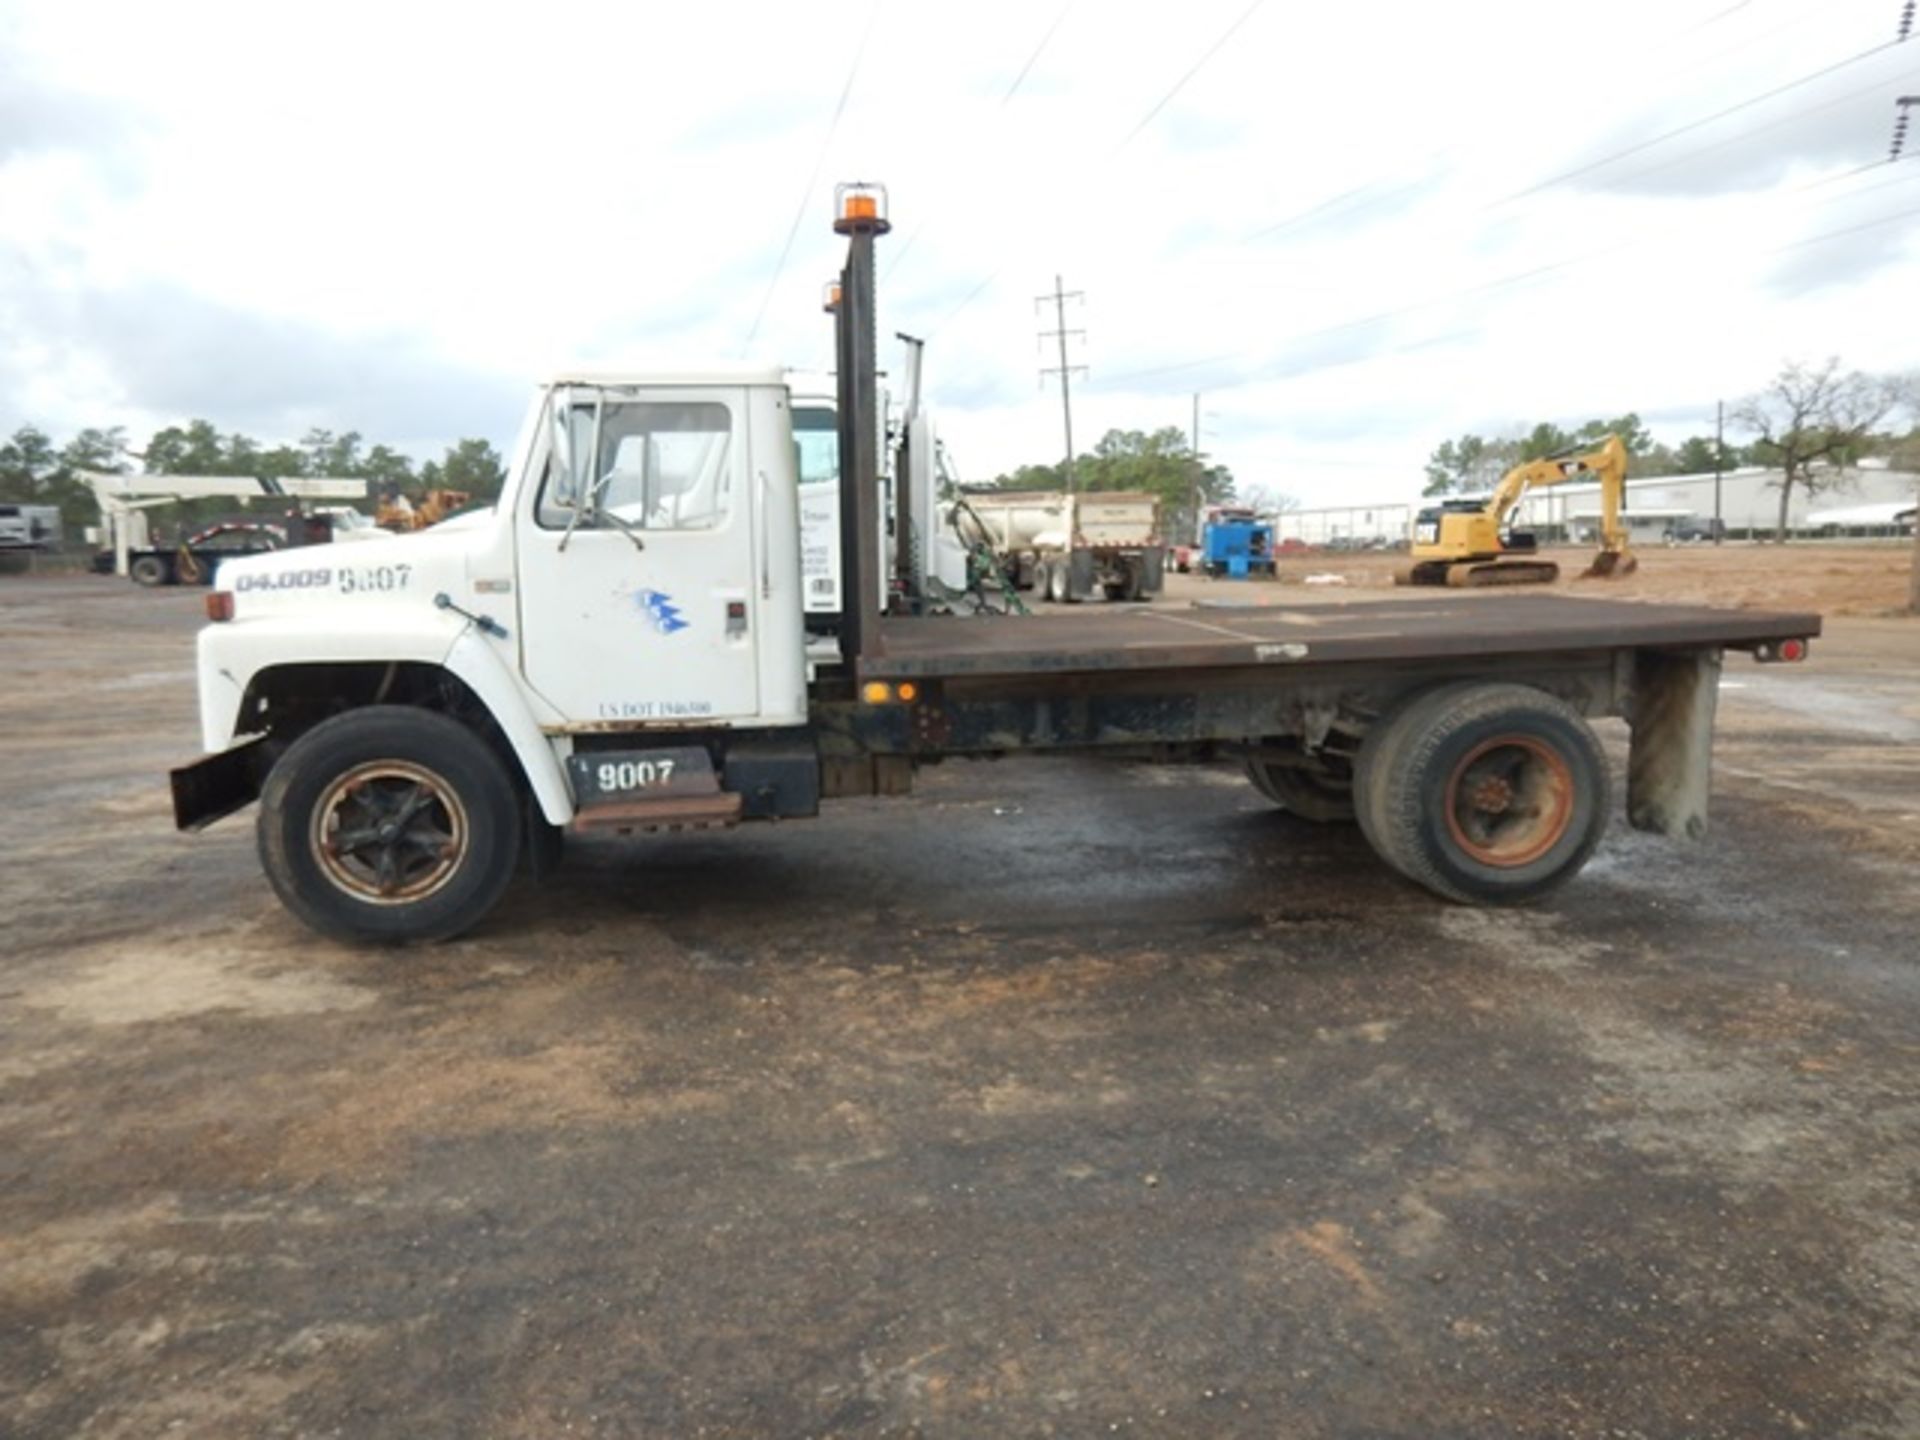 1988 INTERNATIONAL S 1600 FLATBED TRUCK - Image 2 of 16